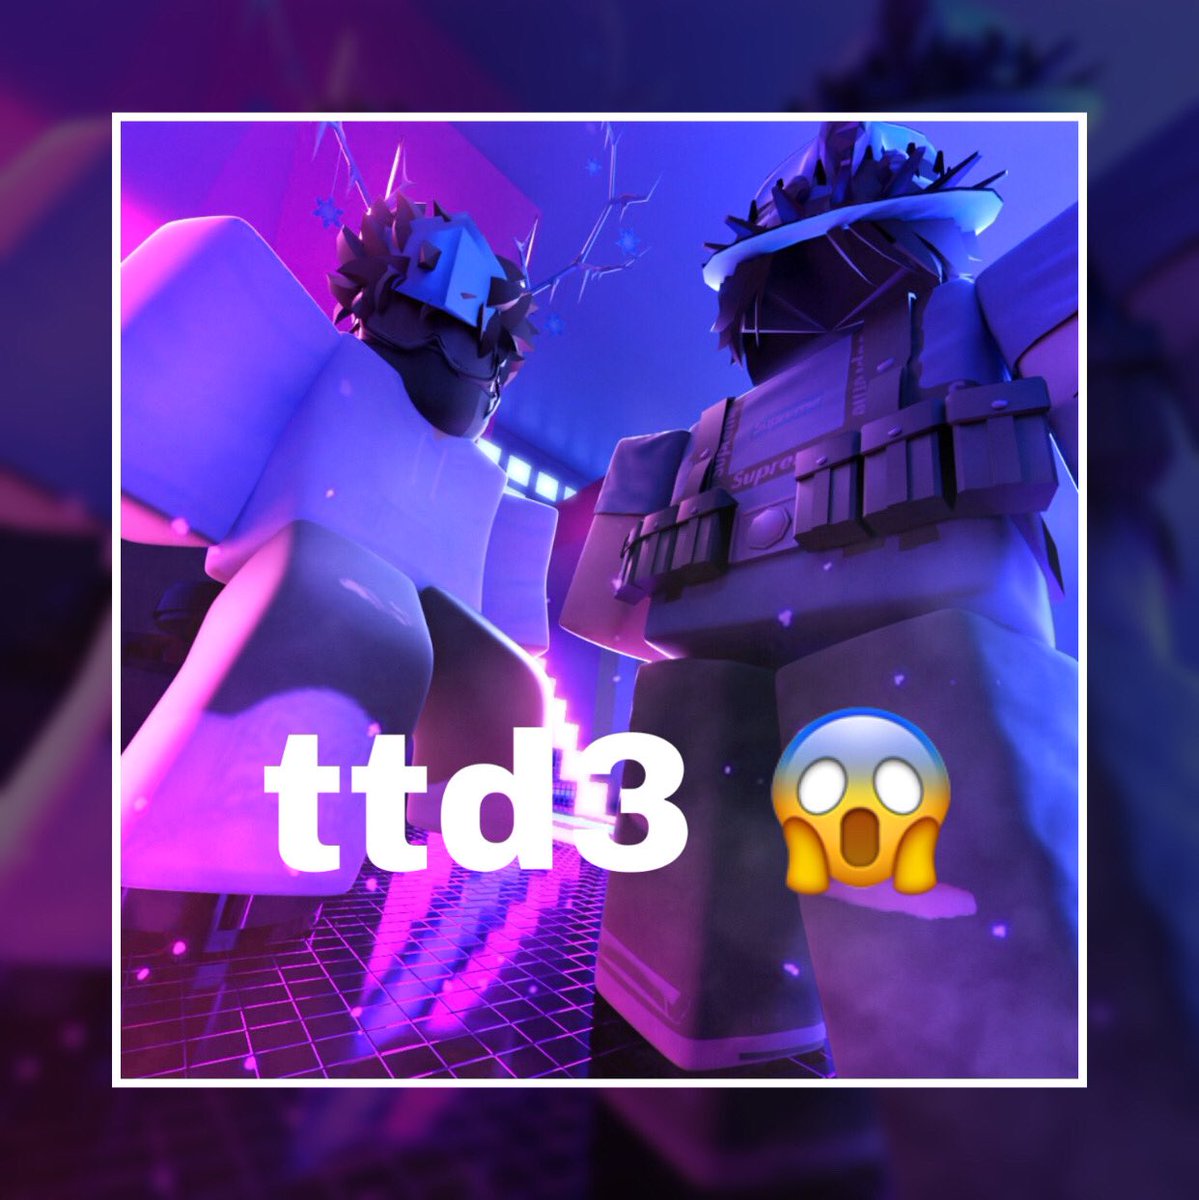 N0_Member on X: Commissions for TTD 3 (Icon), and for @Roblox_Soe 's  Dropper of Hell (thumbnail). I needed to post something since my Twitter  has been dry lately. #Roblox #RobloxDev #RobloxGFX   /